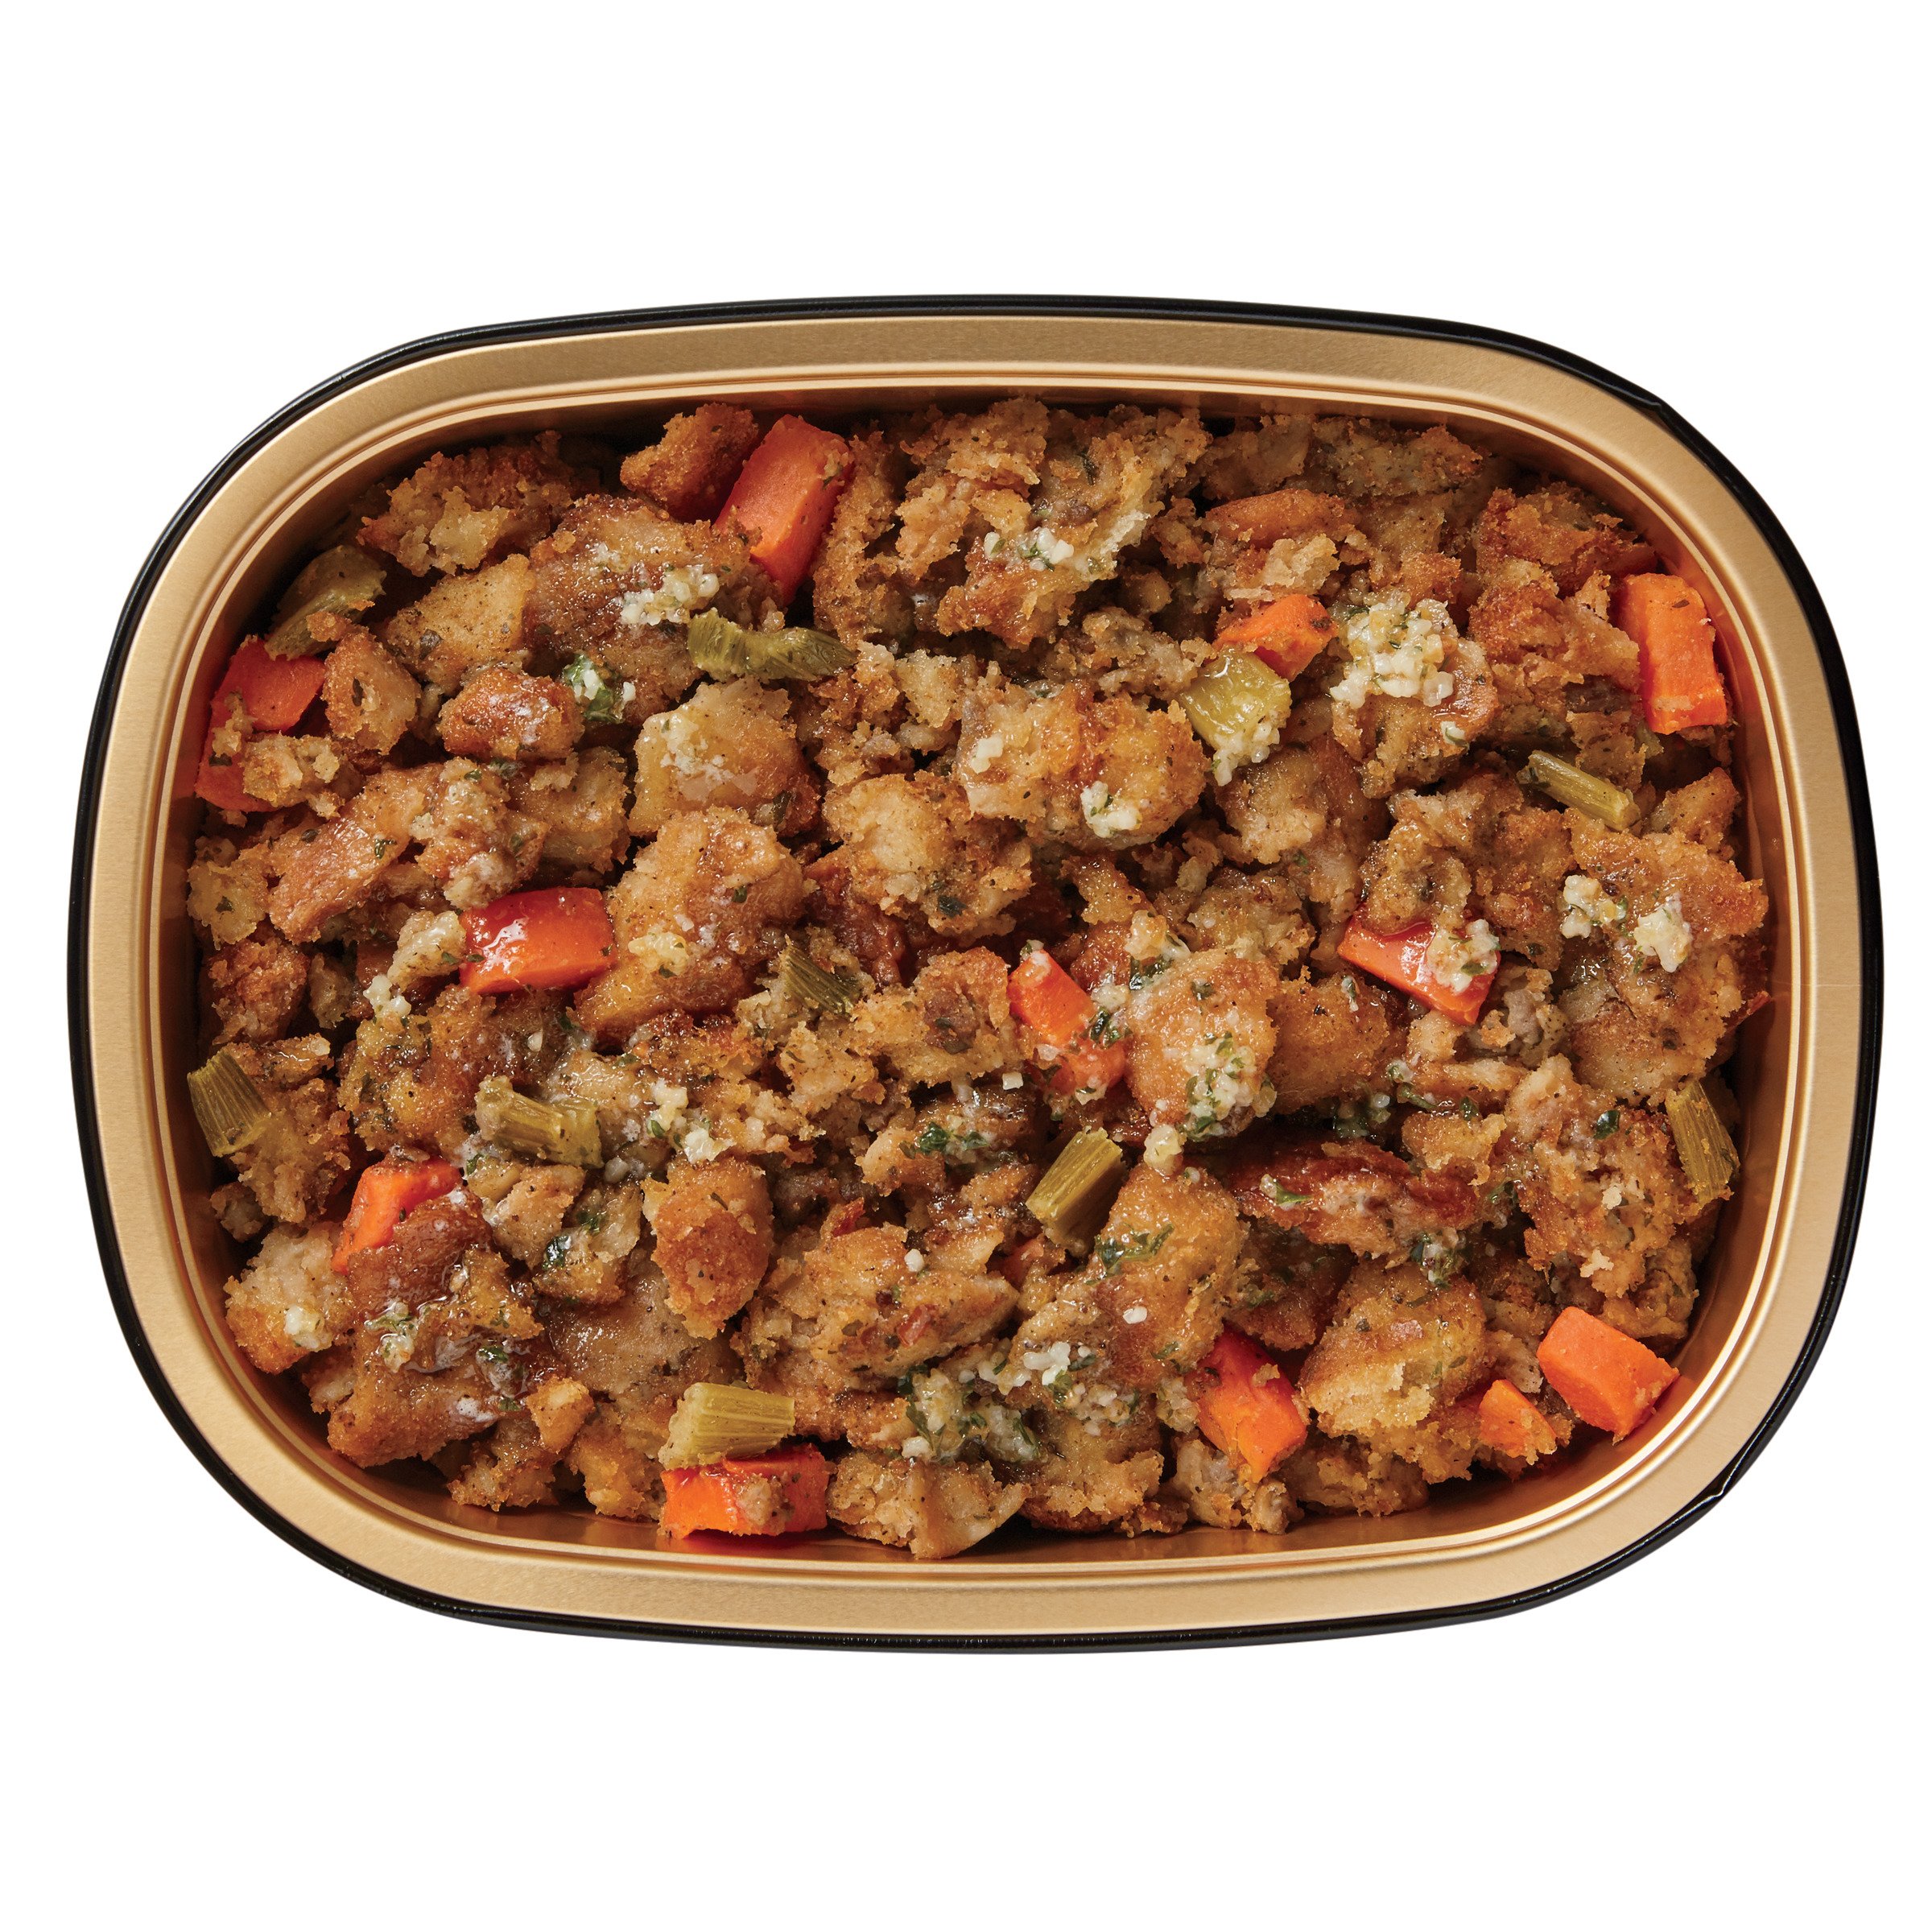 Stove Top Turkey Stuffing Mix - Shop Pantry Meals at H-E-B